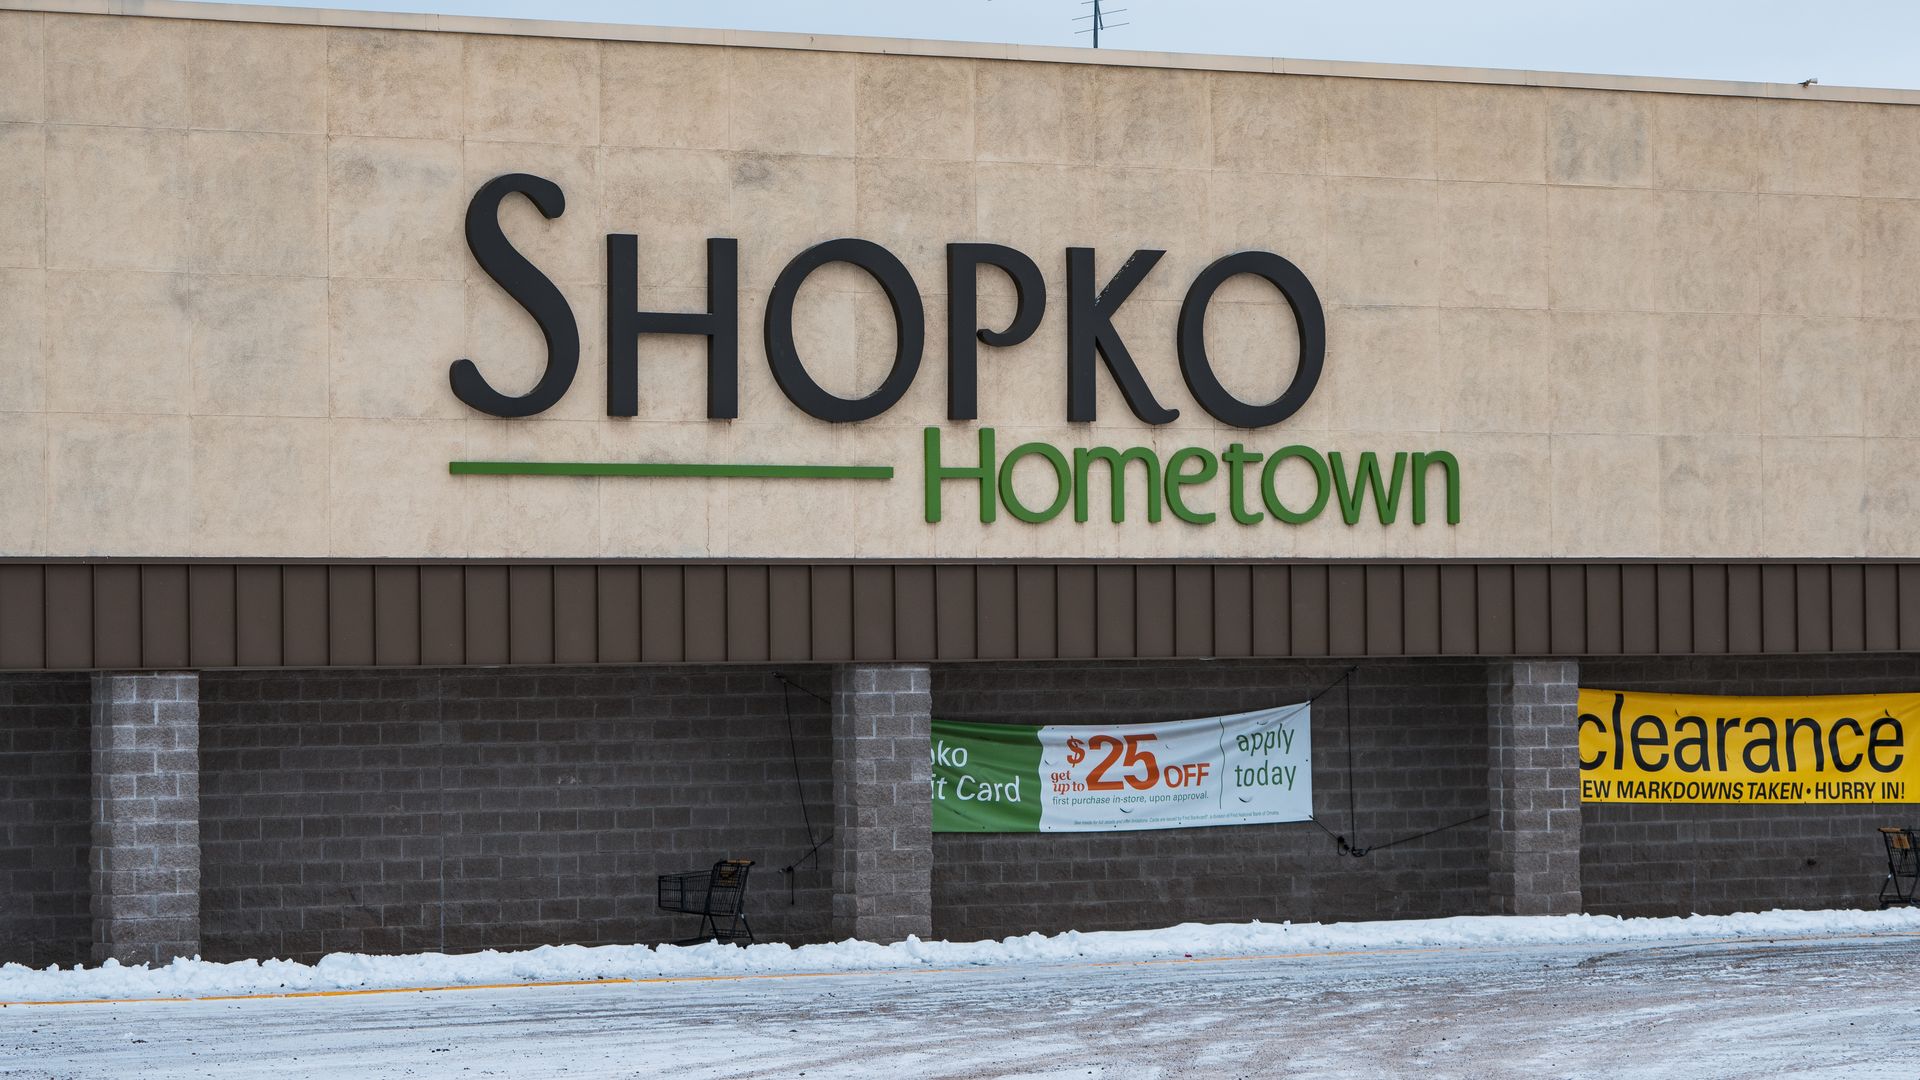 Shopko store with a clearance sign